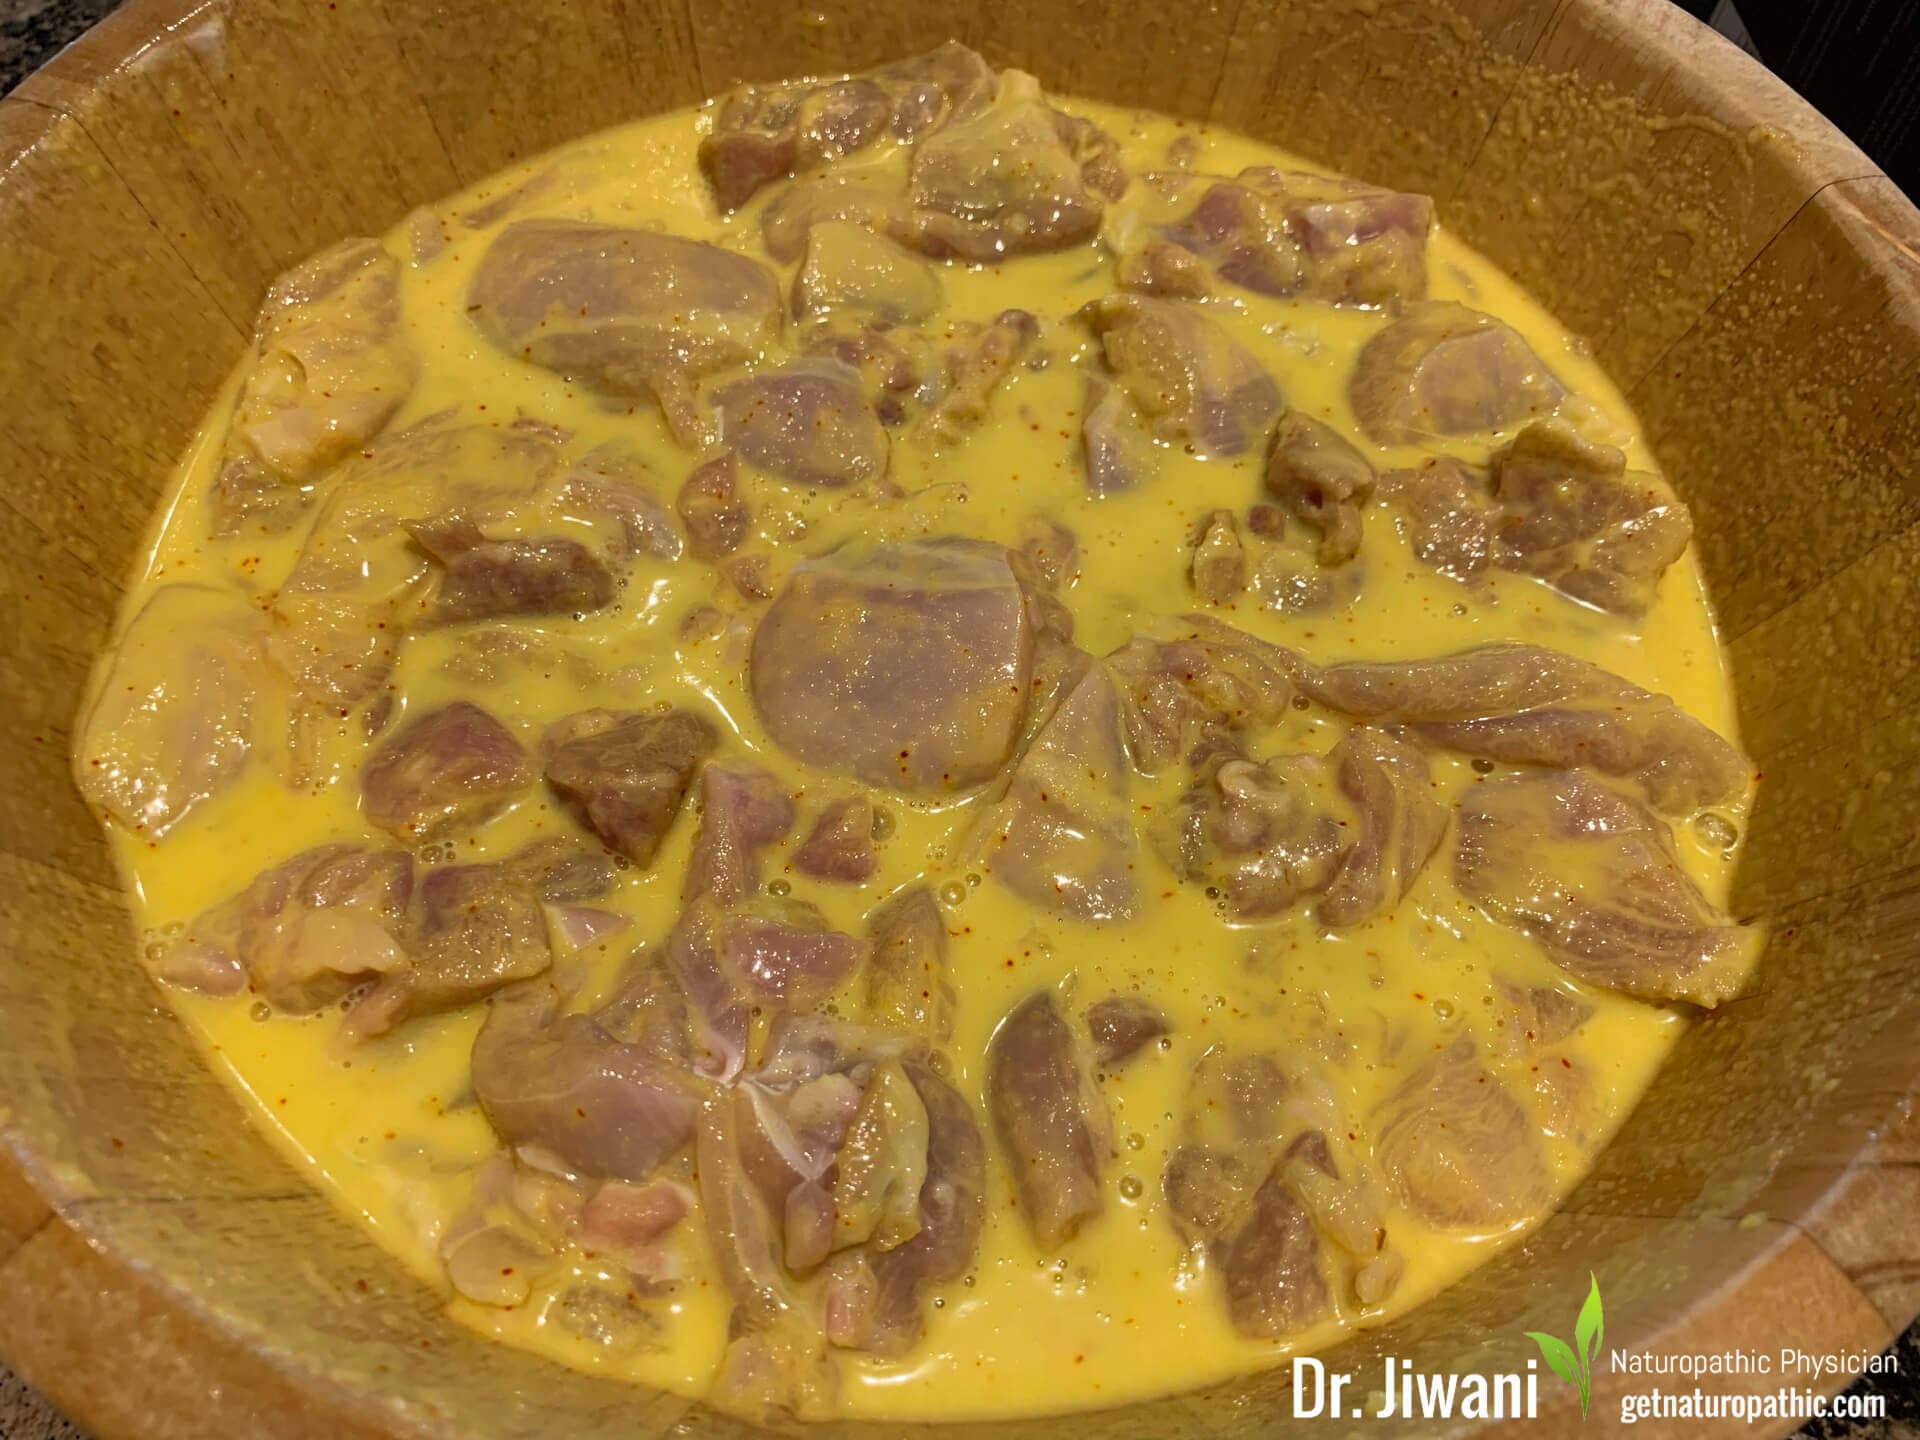 Dr. Jiwani’s Classic Chicken Curry  (Low Carb Dairy-Free) Recipe: Gluten-Free, Grain-Free, Egg-Free, Dairy-Free, Corn-Free, Soy-Free, Sugar-Free, Ideal For Diabetic, Paleo, Keto & Candida Diets | Dr. Jiwani's Naturopathic Nuggets Blog